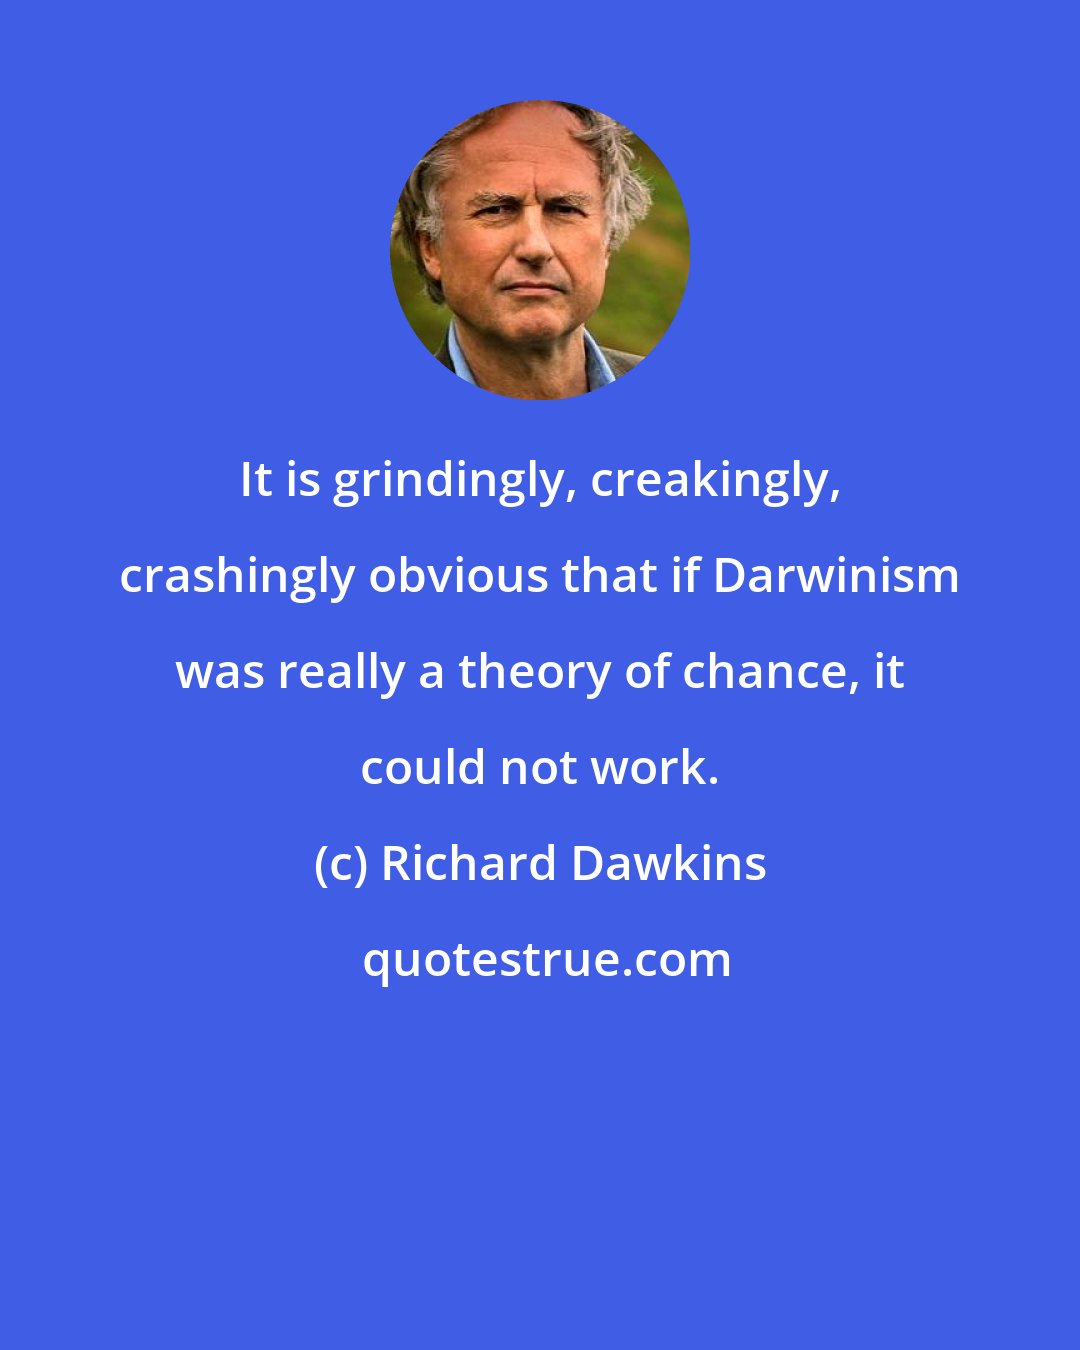 Richard Dawkins: It is grindingly, creakingly, crashingly obvious that if Darwinism was really a theory of chance, it could not work.